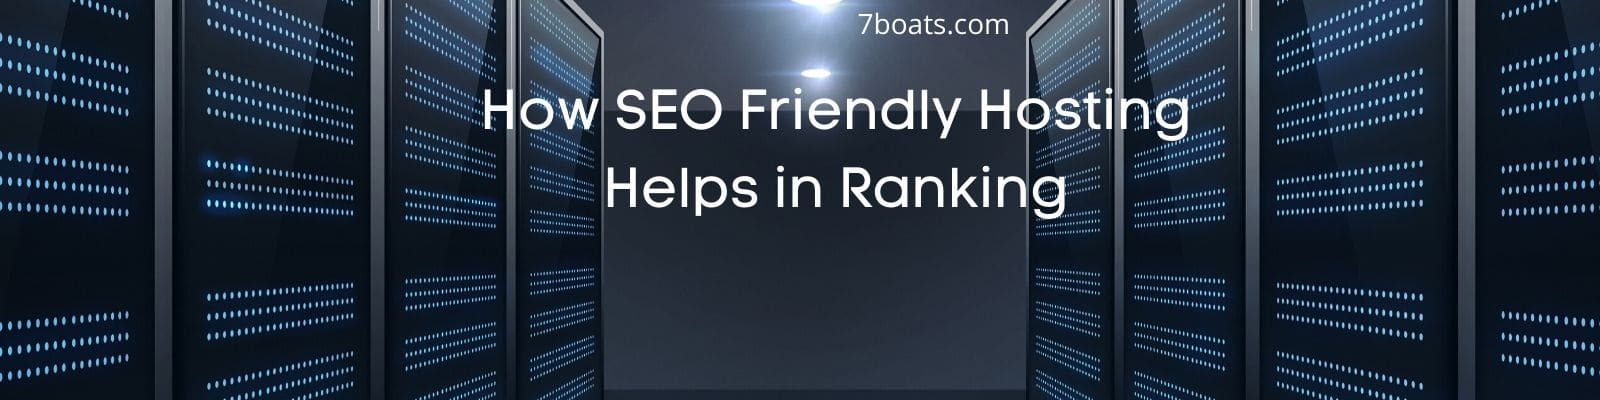 How SEO Friendly Hosting Helps in Ranking, how to select web hosting for better SEO